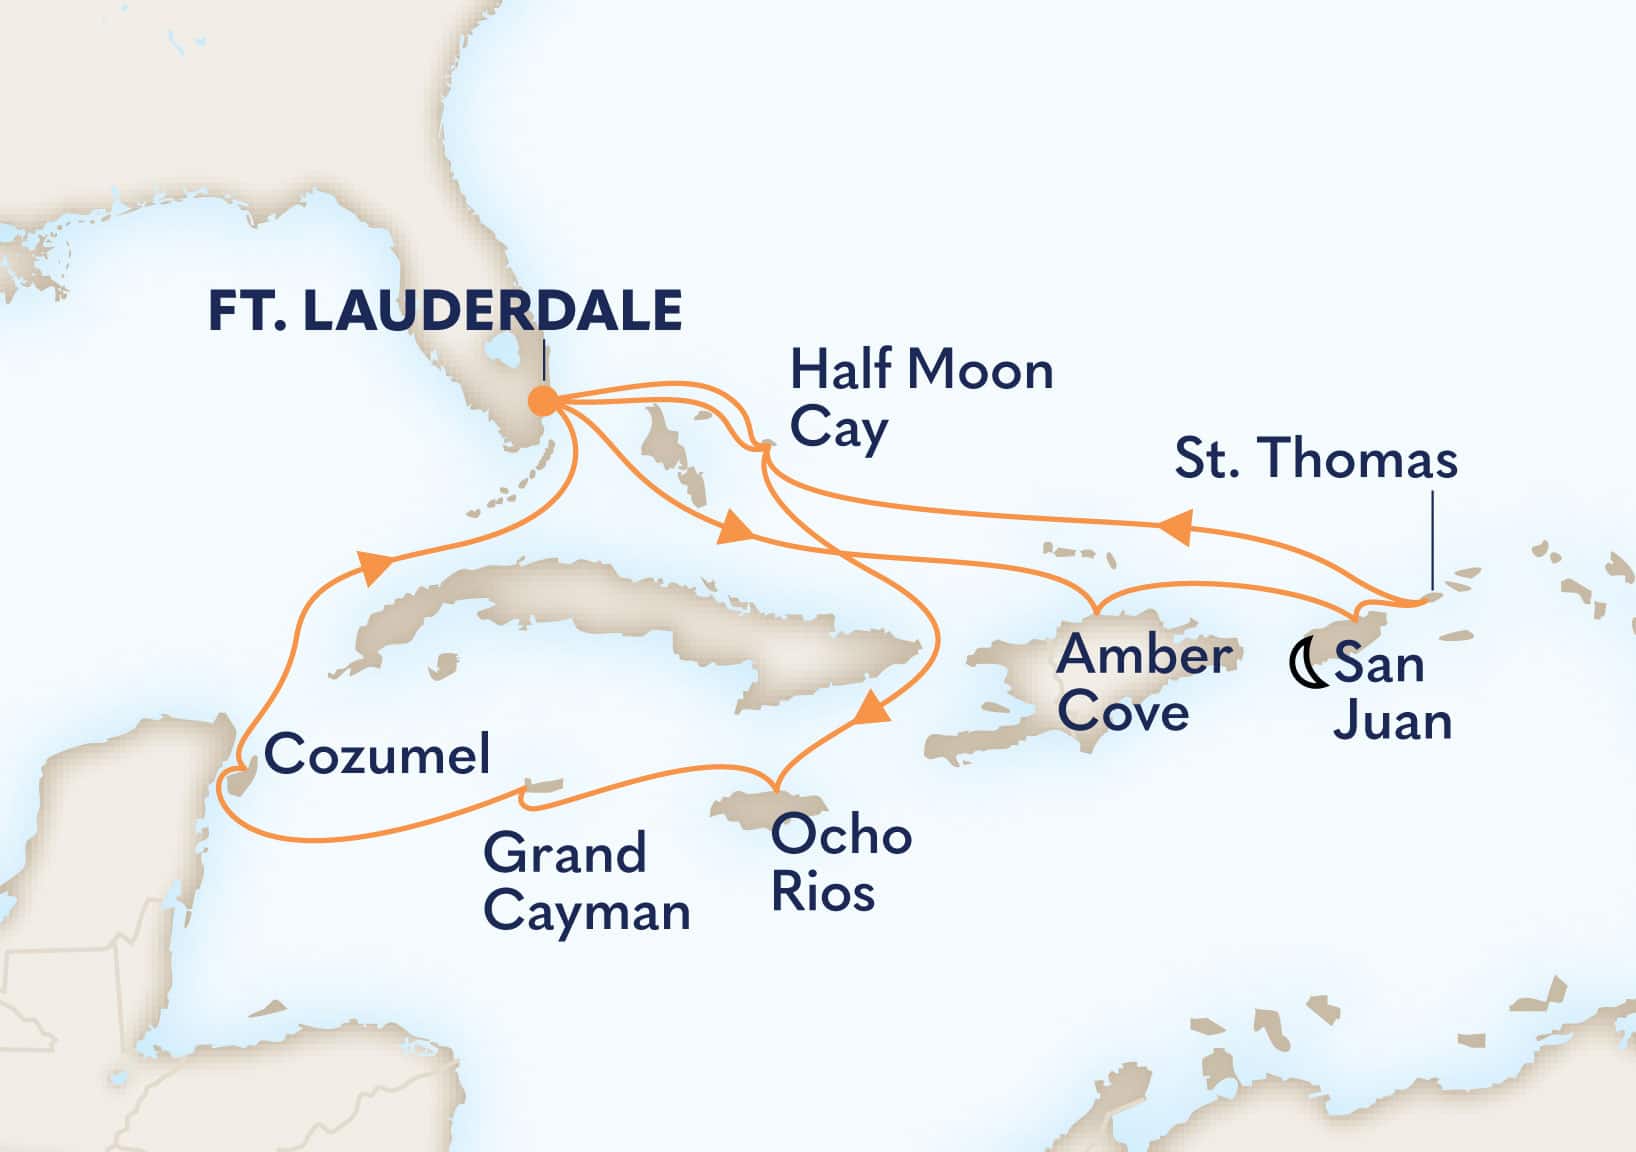 14-Day Eastern / Western Caribbean Itinerary Map